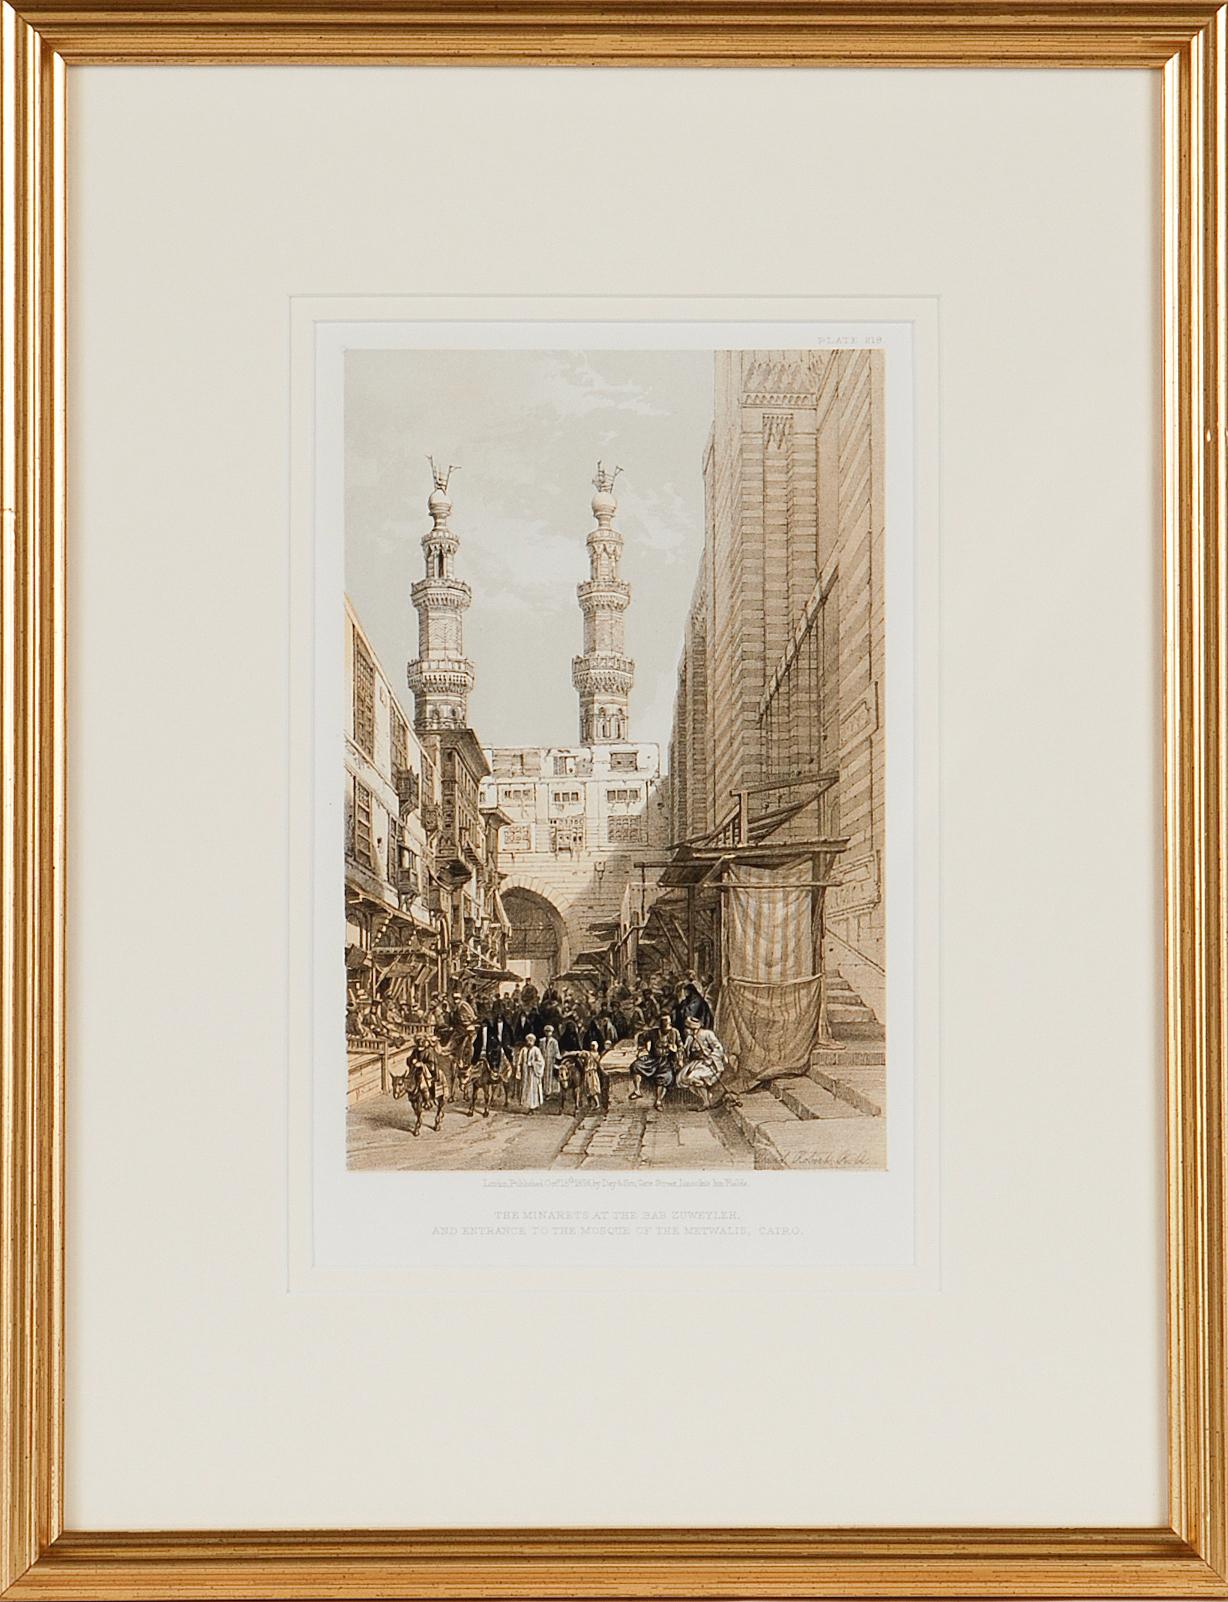 Five Framed Views of Egypt & Petra: Original 19th C. Lithographs by D. Roberts - Print by David Roberts